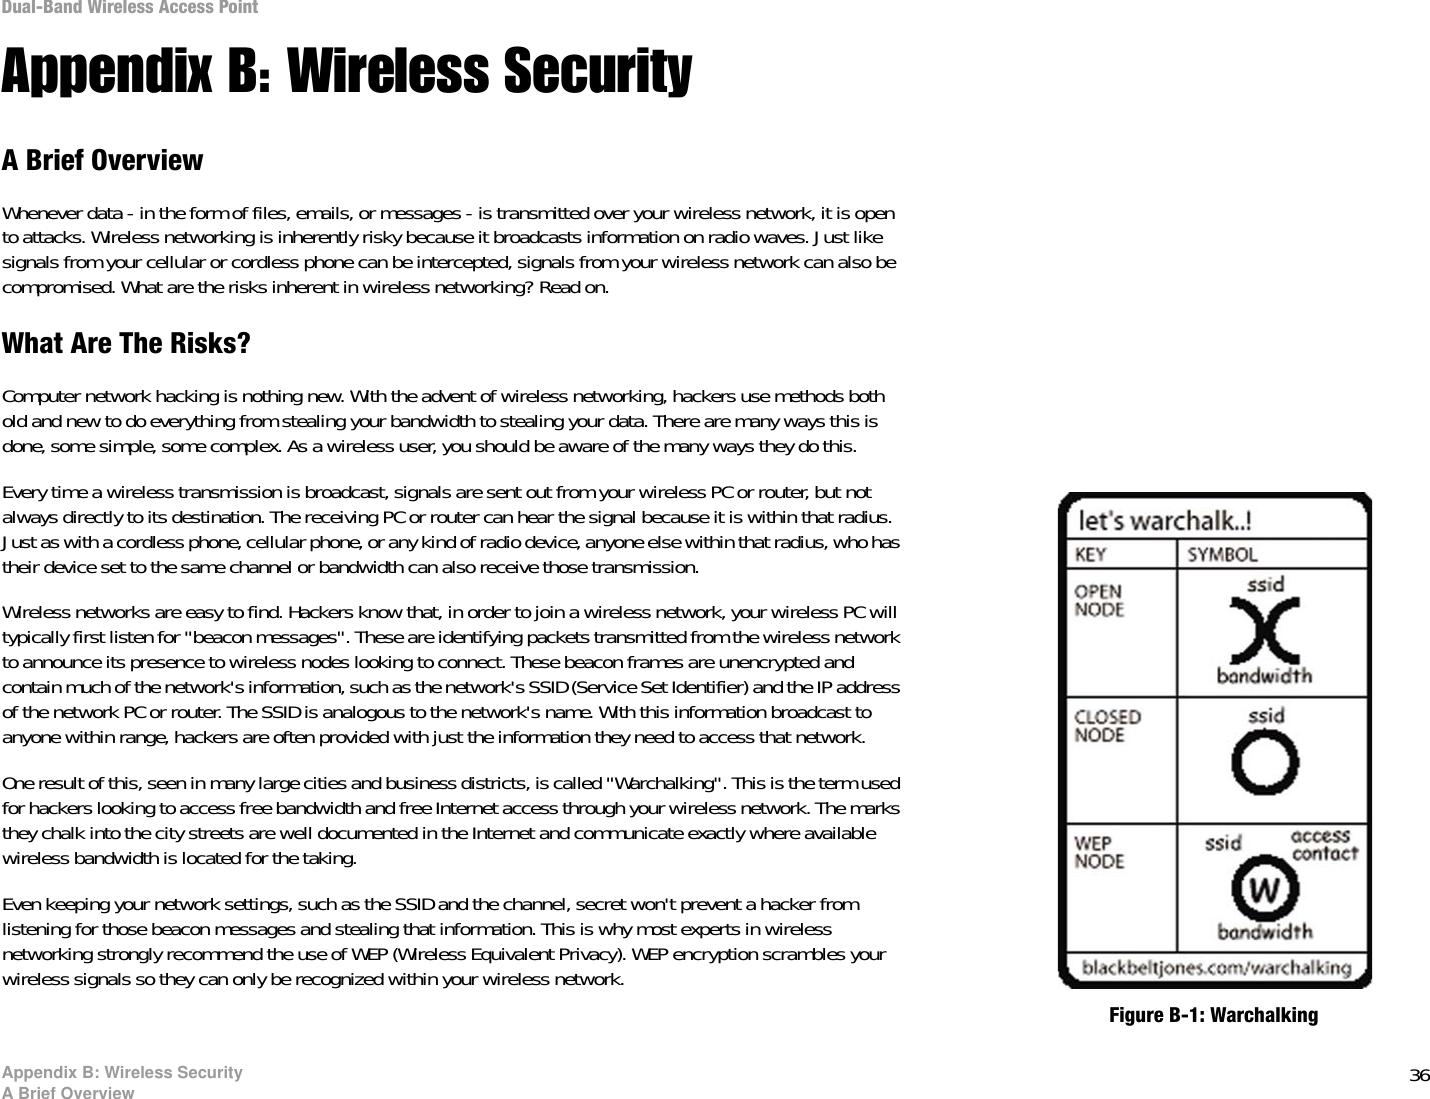 36Appendix B: Wireless SecurityA Brief OverviewDual-Band Wireless Access PointAppendix B: Wireless SecurityA Brief OverviewWhenever data - in the form of files, emails, or messages - is transmitted over your wireless network, it is open to attacks. Wireless networking is inherently risky because it broadcasts information on radio waves. Just like signals from your cellular or cordless phone can be intercepted, signals from your wireless network can also be compromised. What are the risks inherent in wireless networking? Read on.What Are The Risks?Computer network hacking is nothing new. With the advent of wireless networking, hackers use methods both old and new to do everything from stealing your bandwidth to stealing your data. There are many ways this is done, some simple, some complex. As a wireless user, you should be aware of the many ways they do this.Every time a wireless transmission is broadcast, signals are sent out from your wireless PC or router, but not always directly to its destination. The receiving PC or router can hear the signal because it is within that radius. Just as with a cordless phone, cellular phone, or any kind of radio device, anyone else within that radius, who has their device set to the same channel or bandwidth can also receive those transmission.Wireless networks are easy to find. Hackers know that, in order to join a wireless network, your wireless PC will typically first listen for &quot;beacon messages&quot;. These are identifying packets transmitted from the wireless network to announce its presence to wireless nodes looking to connect. These beacon frames are unencrypted and contain much of the network&apos;s information, such as the network&apos;s SSID (Service Set Identifier) and the IP address of the network PC or router. The SSID is analogous to the network&apos;s name. With this information broadcast to anyone within range, hackers are often provided with just the information they need to access that network.One result of this, seen in many large cities and business districts, is called &quot;Warchalking&quot;. This is the term used for hackers looking to access free bandwidth and free Internet access through your wireless network. The marks they chalk into the city streets are well documented in the Internet and communicate exactly where available wireless bandwidth is located for the taking.Even keeping your network settings, such as the SSID and the channel, secret won&apos;t prevent a hacker from listening for those beacon messages and stealing that information. This is why most experts in wireless networking strongly recommend the use of WEP (Wireless Equivalent Privacy). WEP encryption scrambles your wireless signals so they can only be recognized within your wireless network.Figure B-1: Warchalking